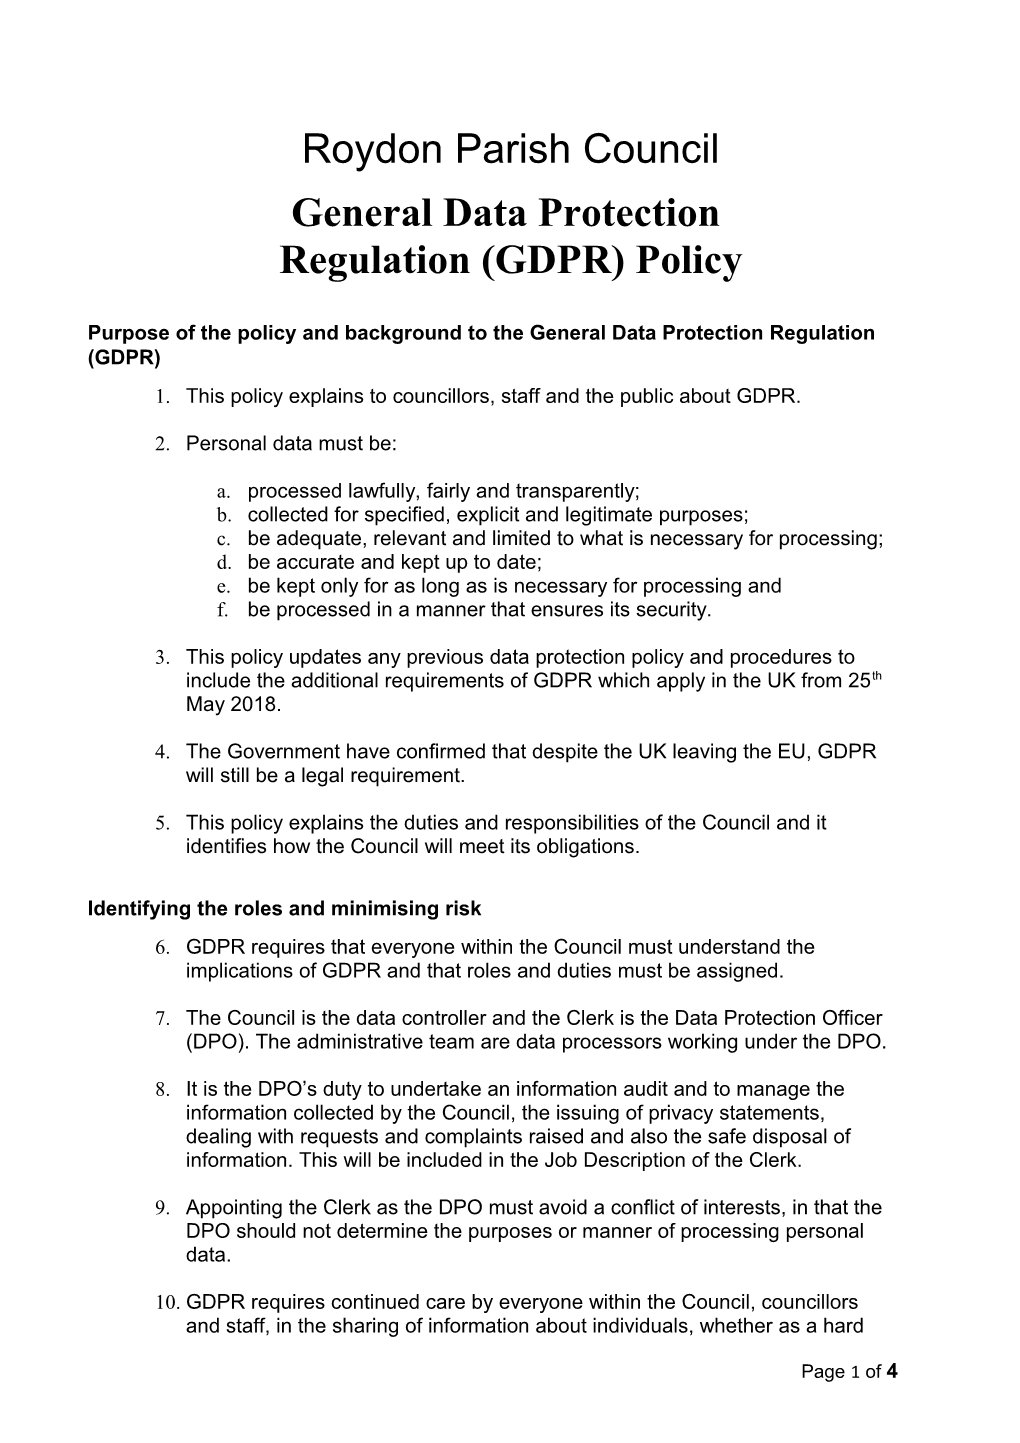 Purpose of the Policy and Background to the General Data Protection Regulation (GDPR)